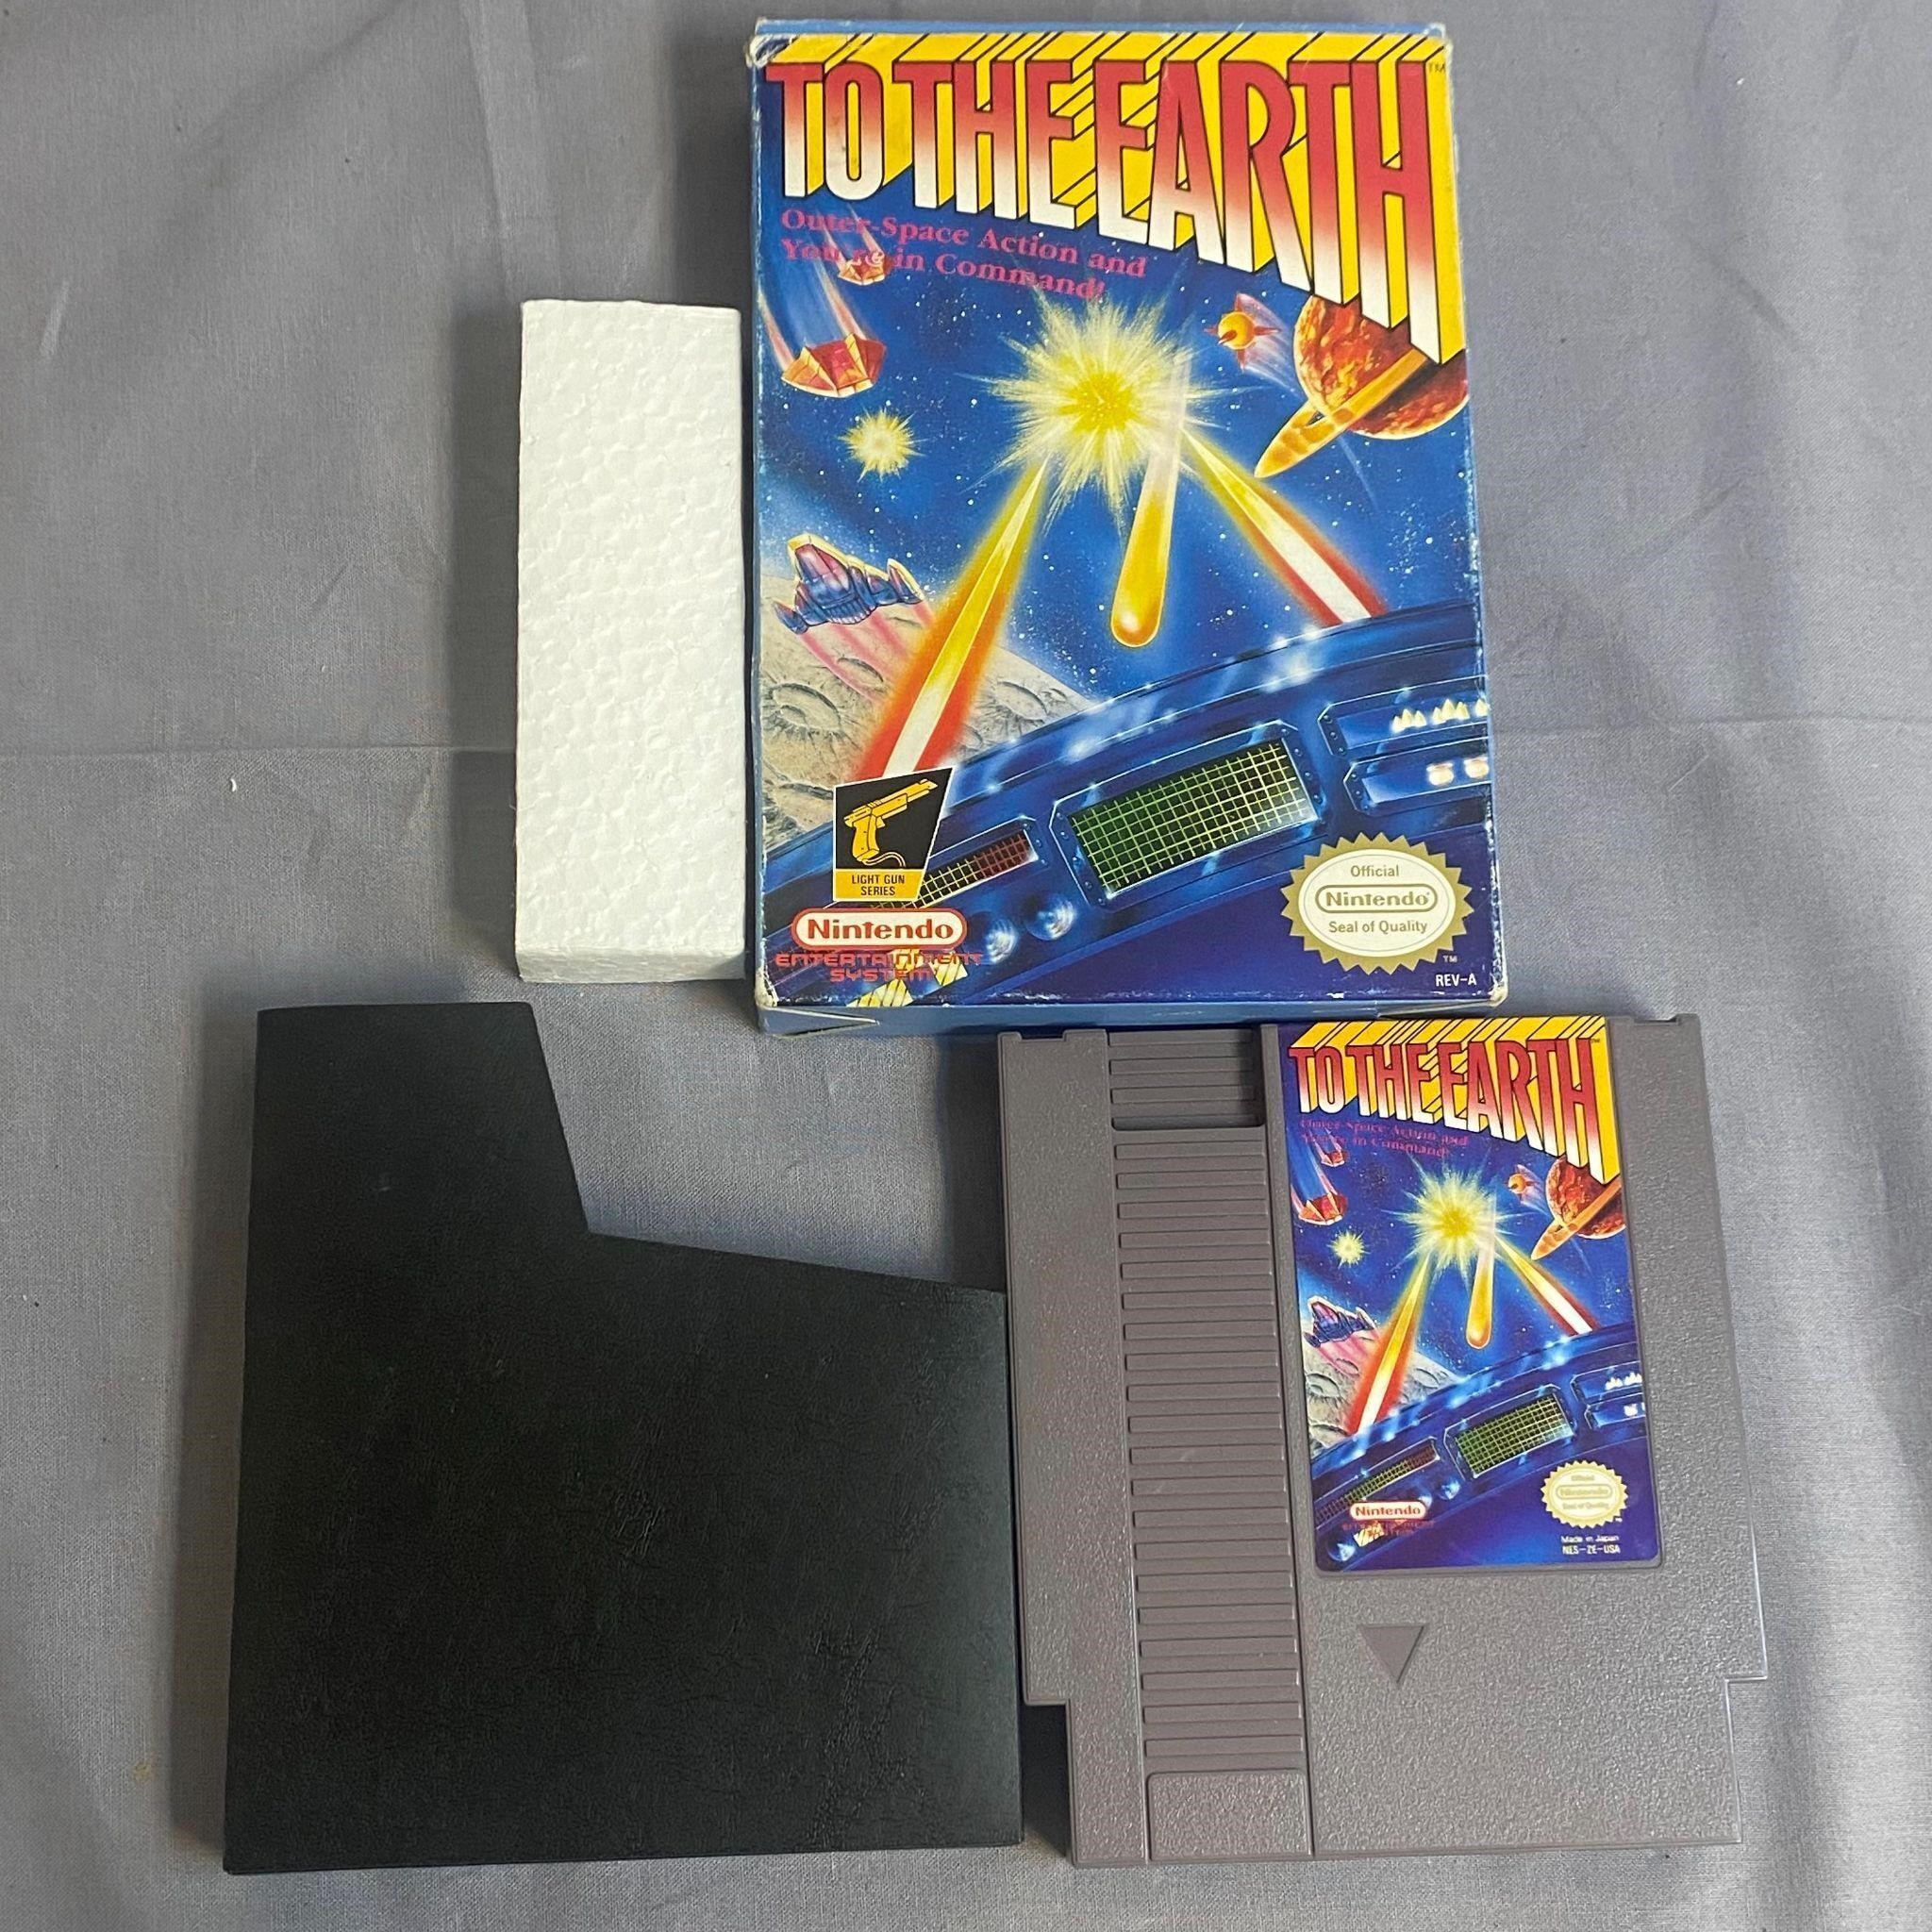 Nintendo NES To the Earth - In Box